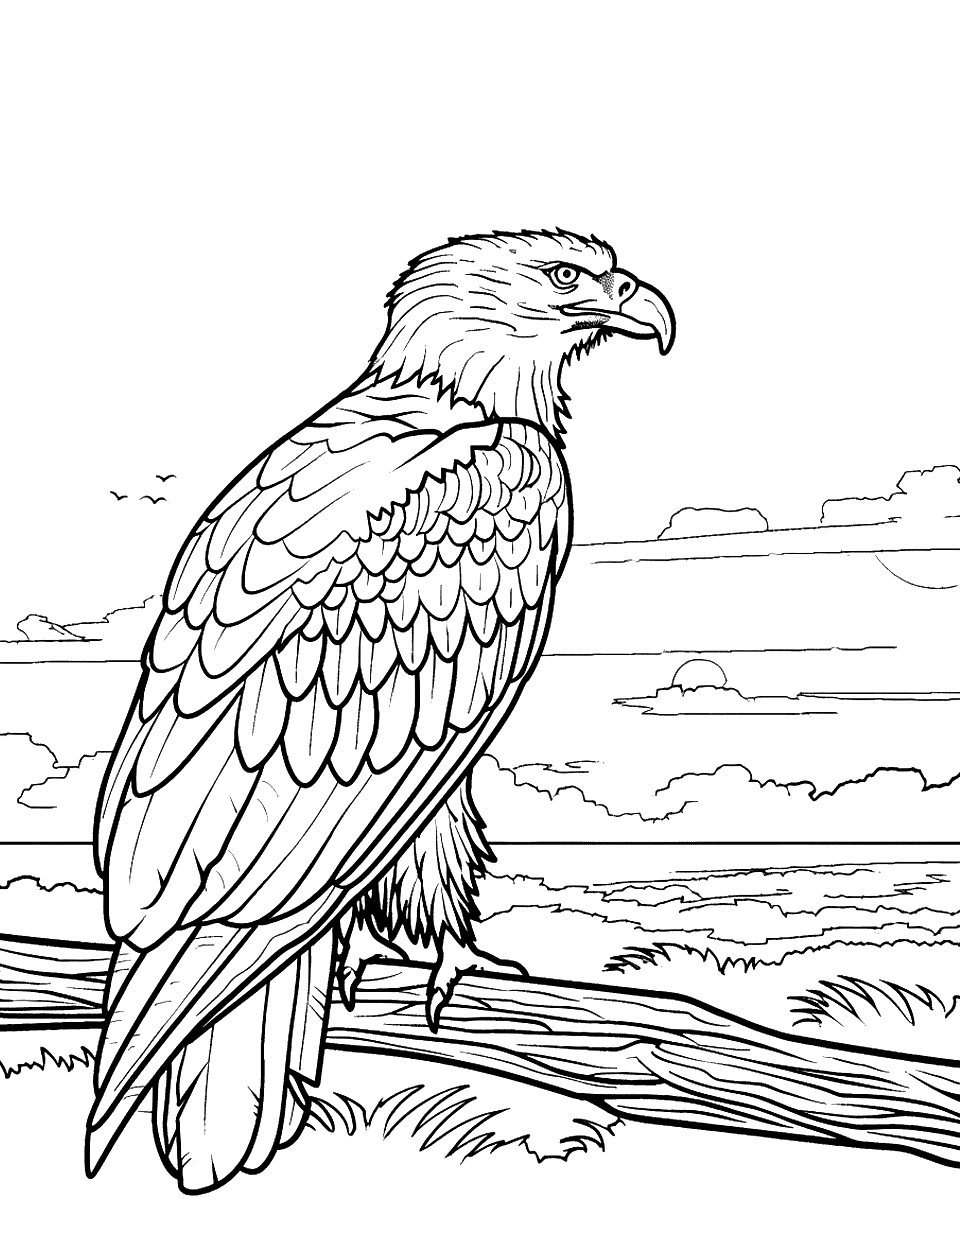 Quiet Moment Before Dawn Eagle Coloring Page - An eagle sits silently on a branch as the first light of dawn begins to break over a plain landscape.